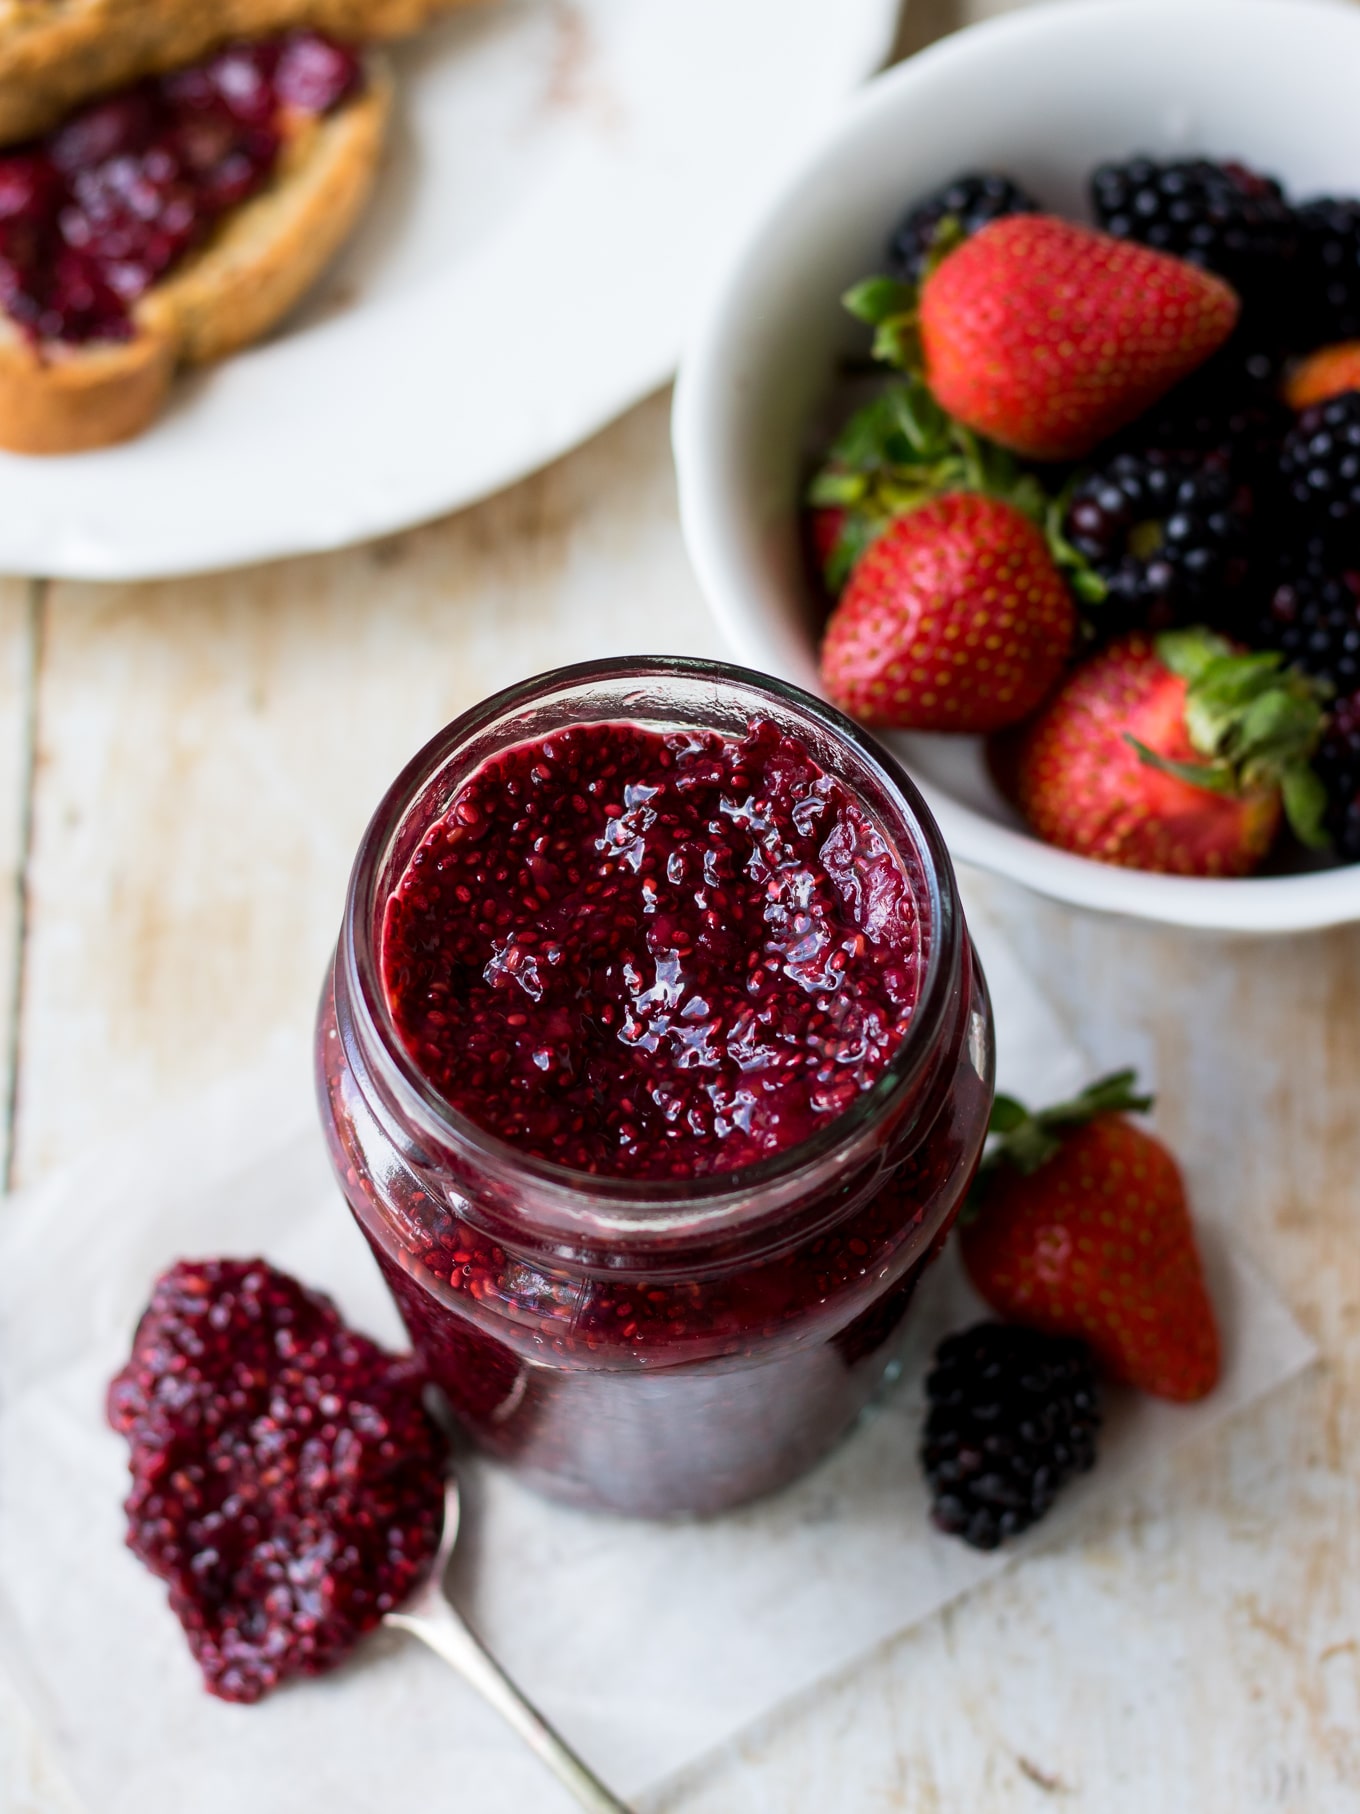 Image of berry chia jam in a small glass jar, shot from a side angle, with a bowl of mixed berries in background.